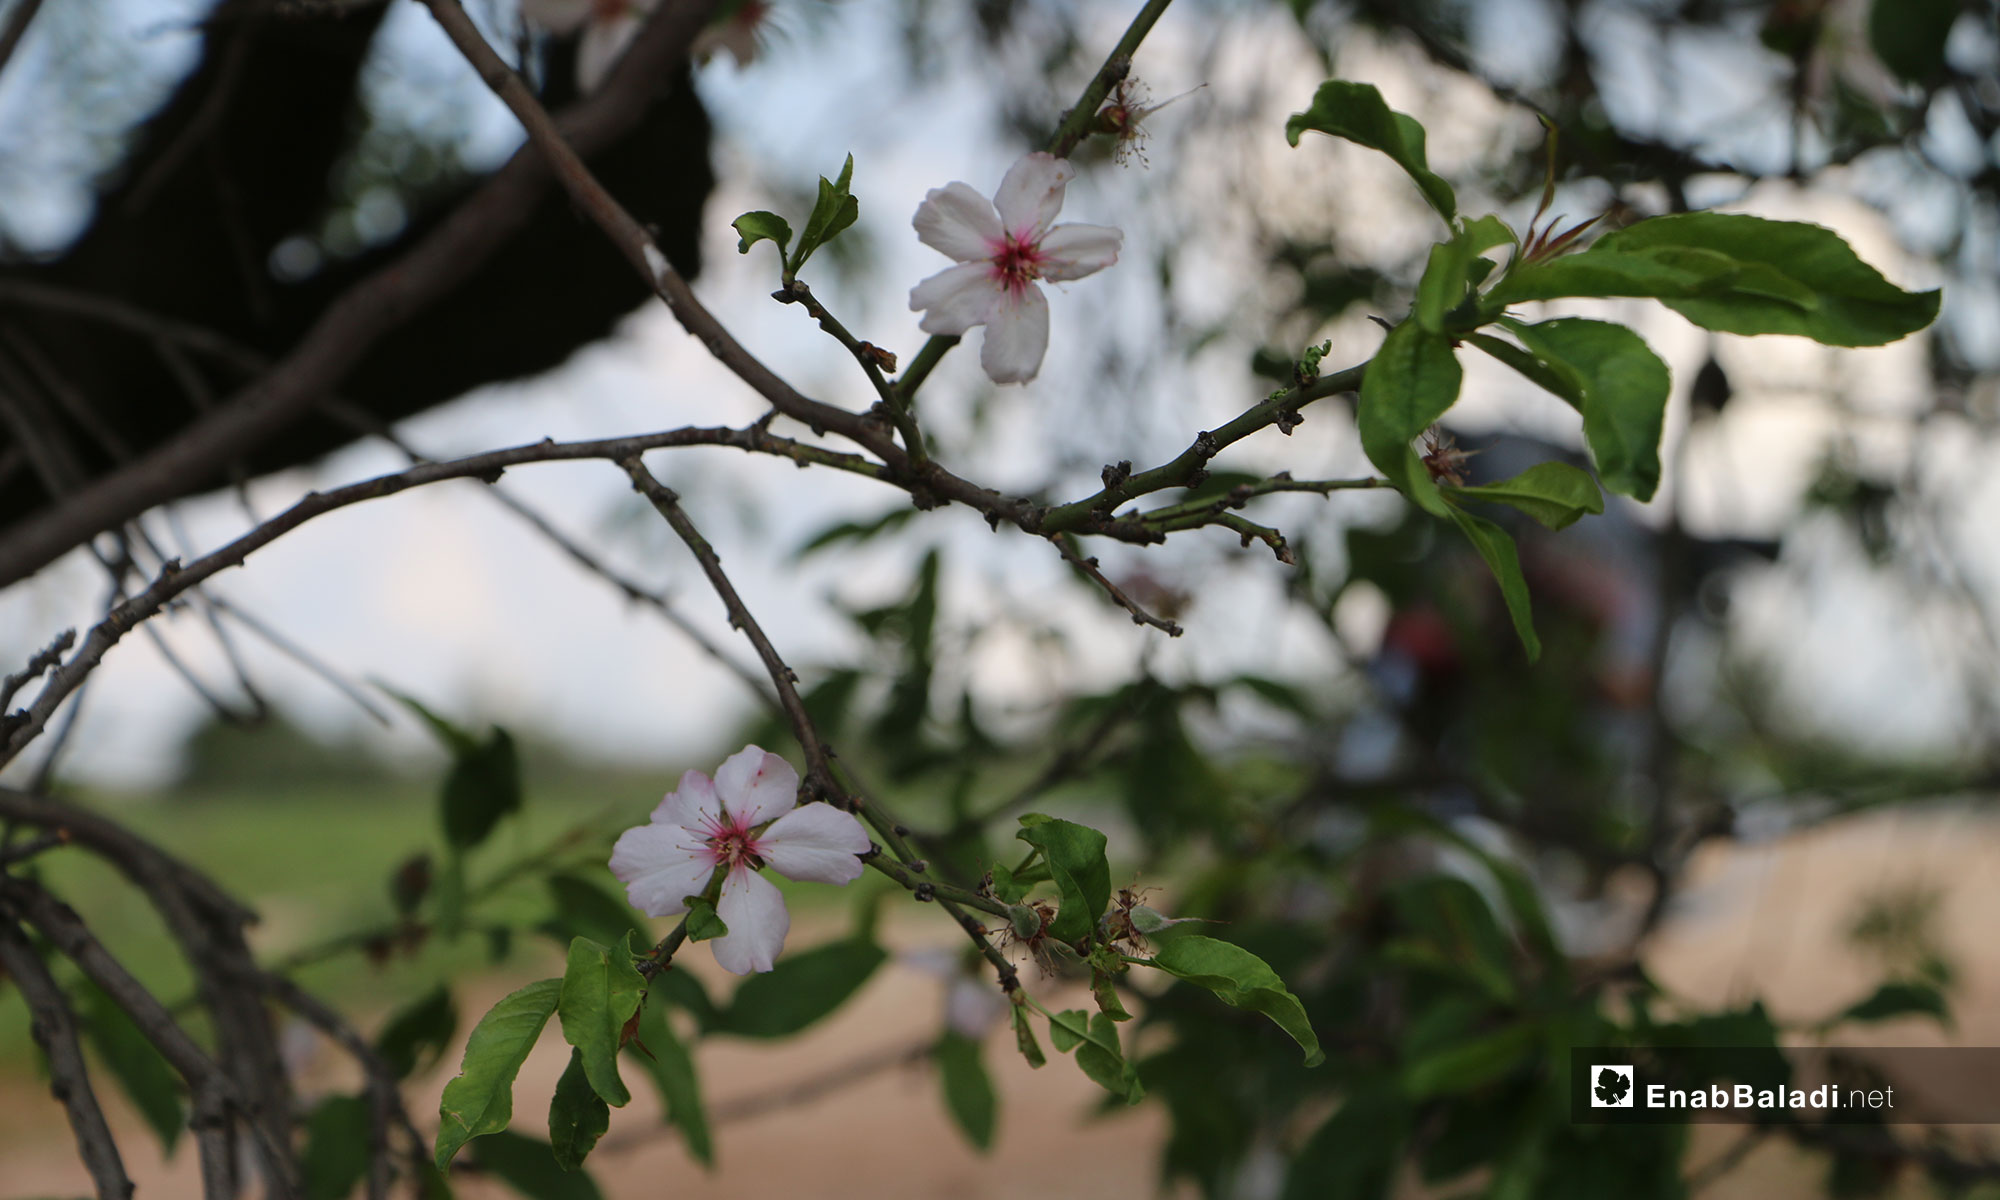 Flowers of almond trees blossoming in northern rural Aleppo – April 10, 2019 (Enab Baladi)